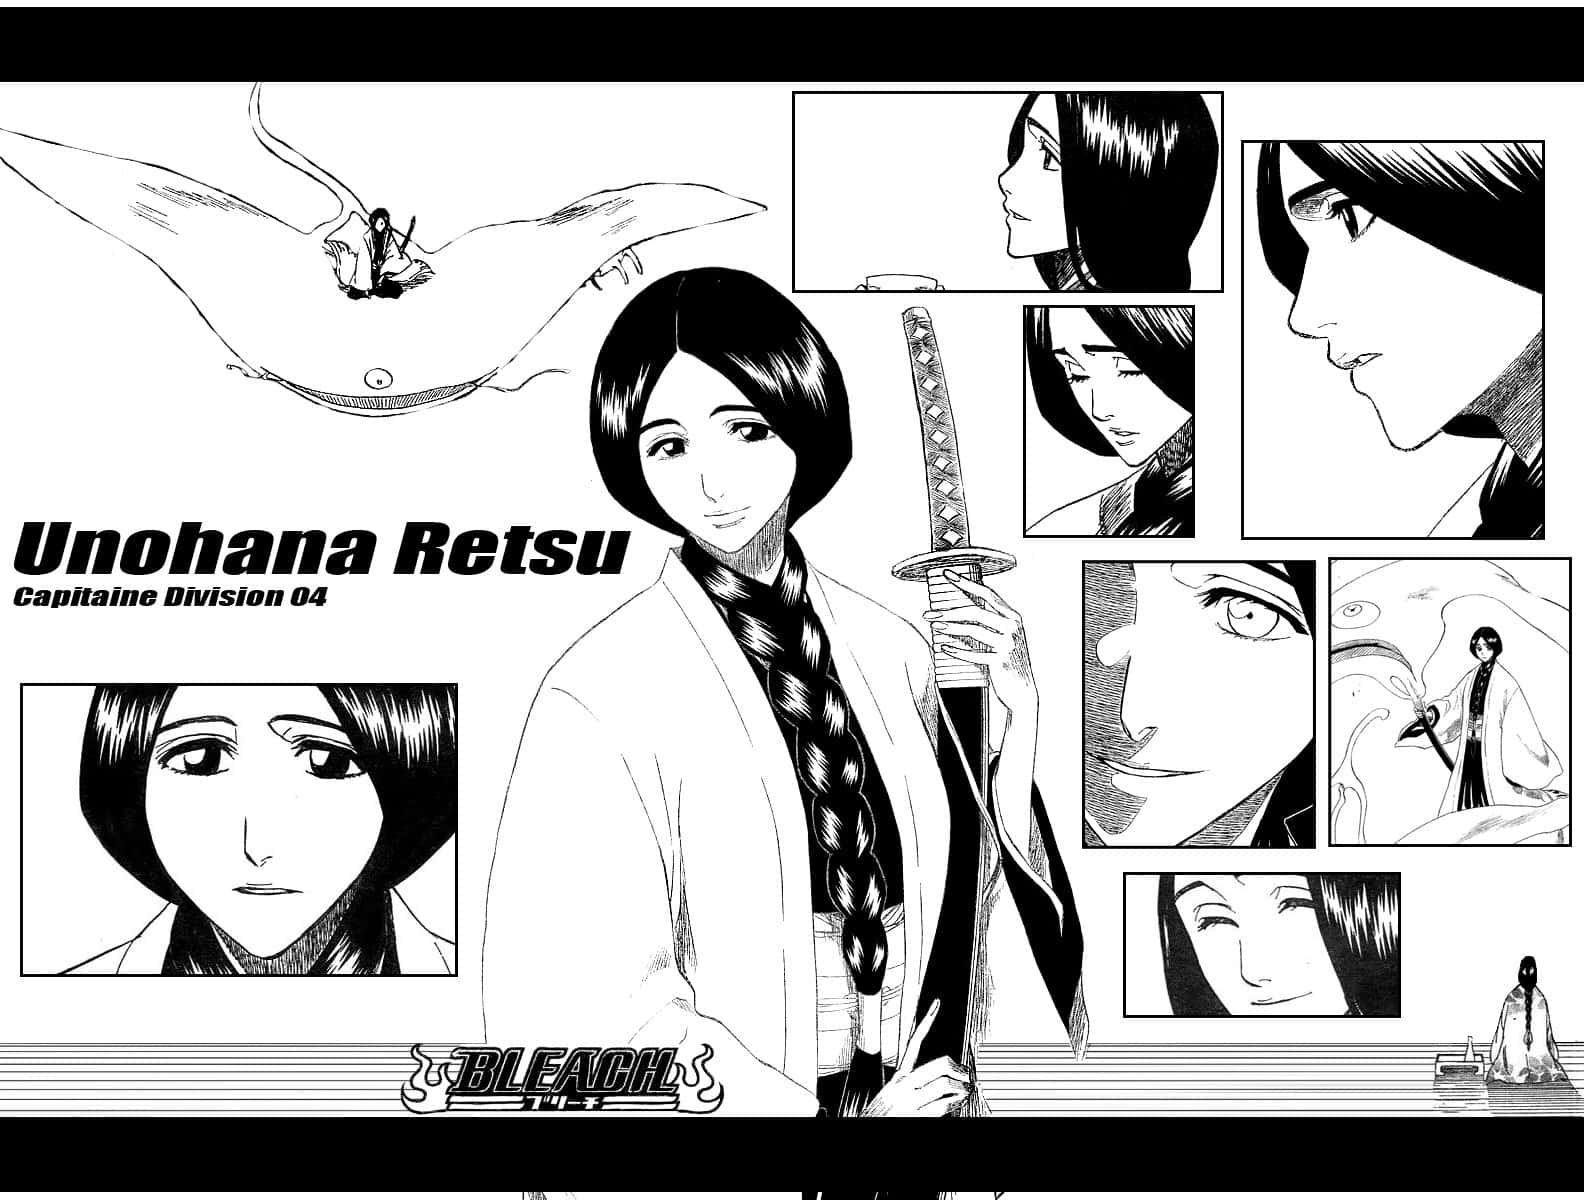 Retsu Unohana - One of the four current captains in the anime series, Bleach. Wallpaper